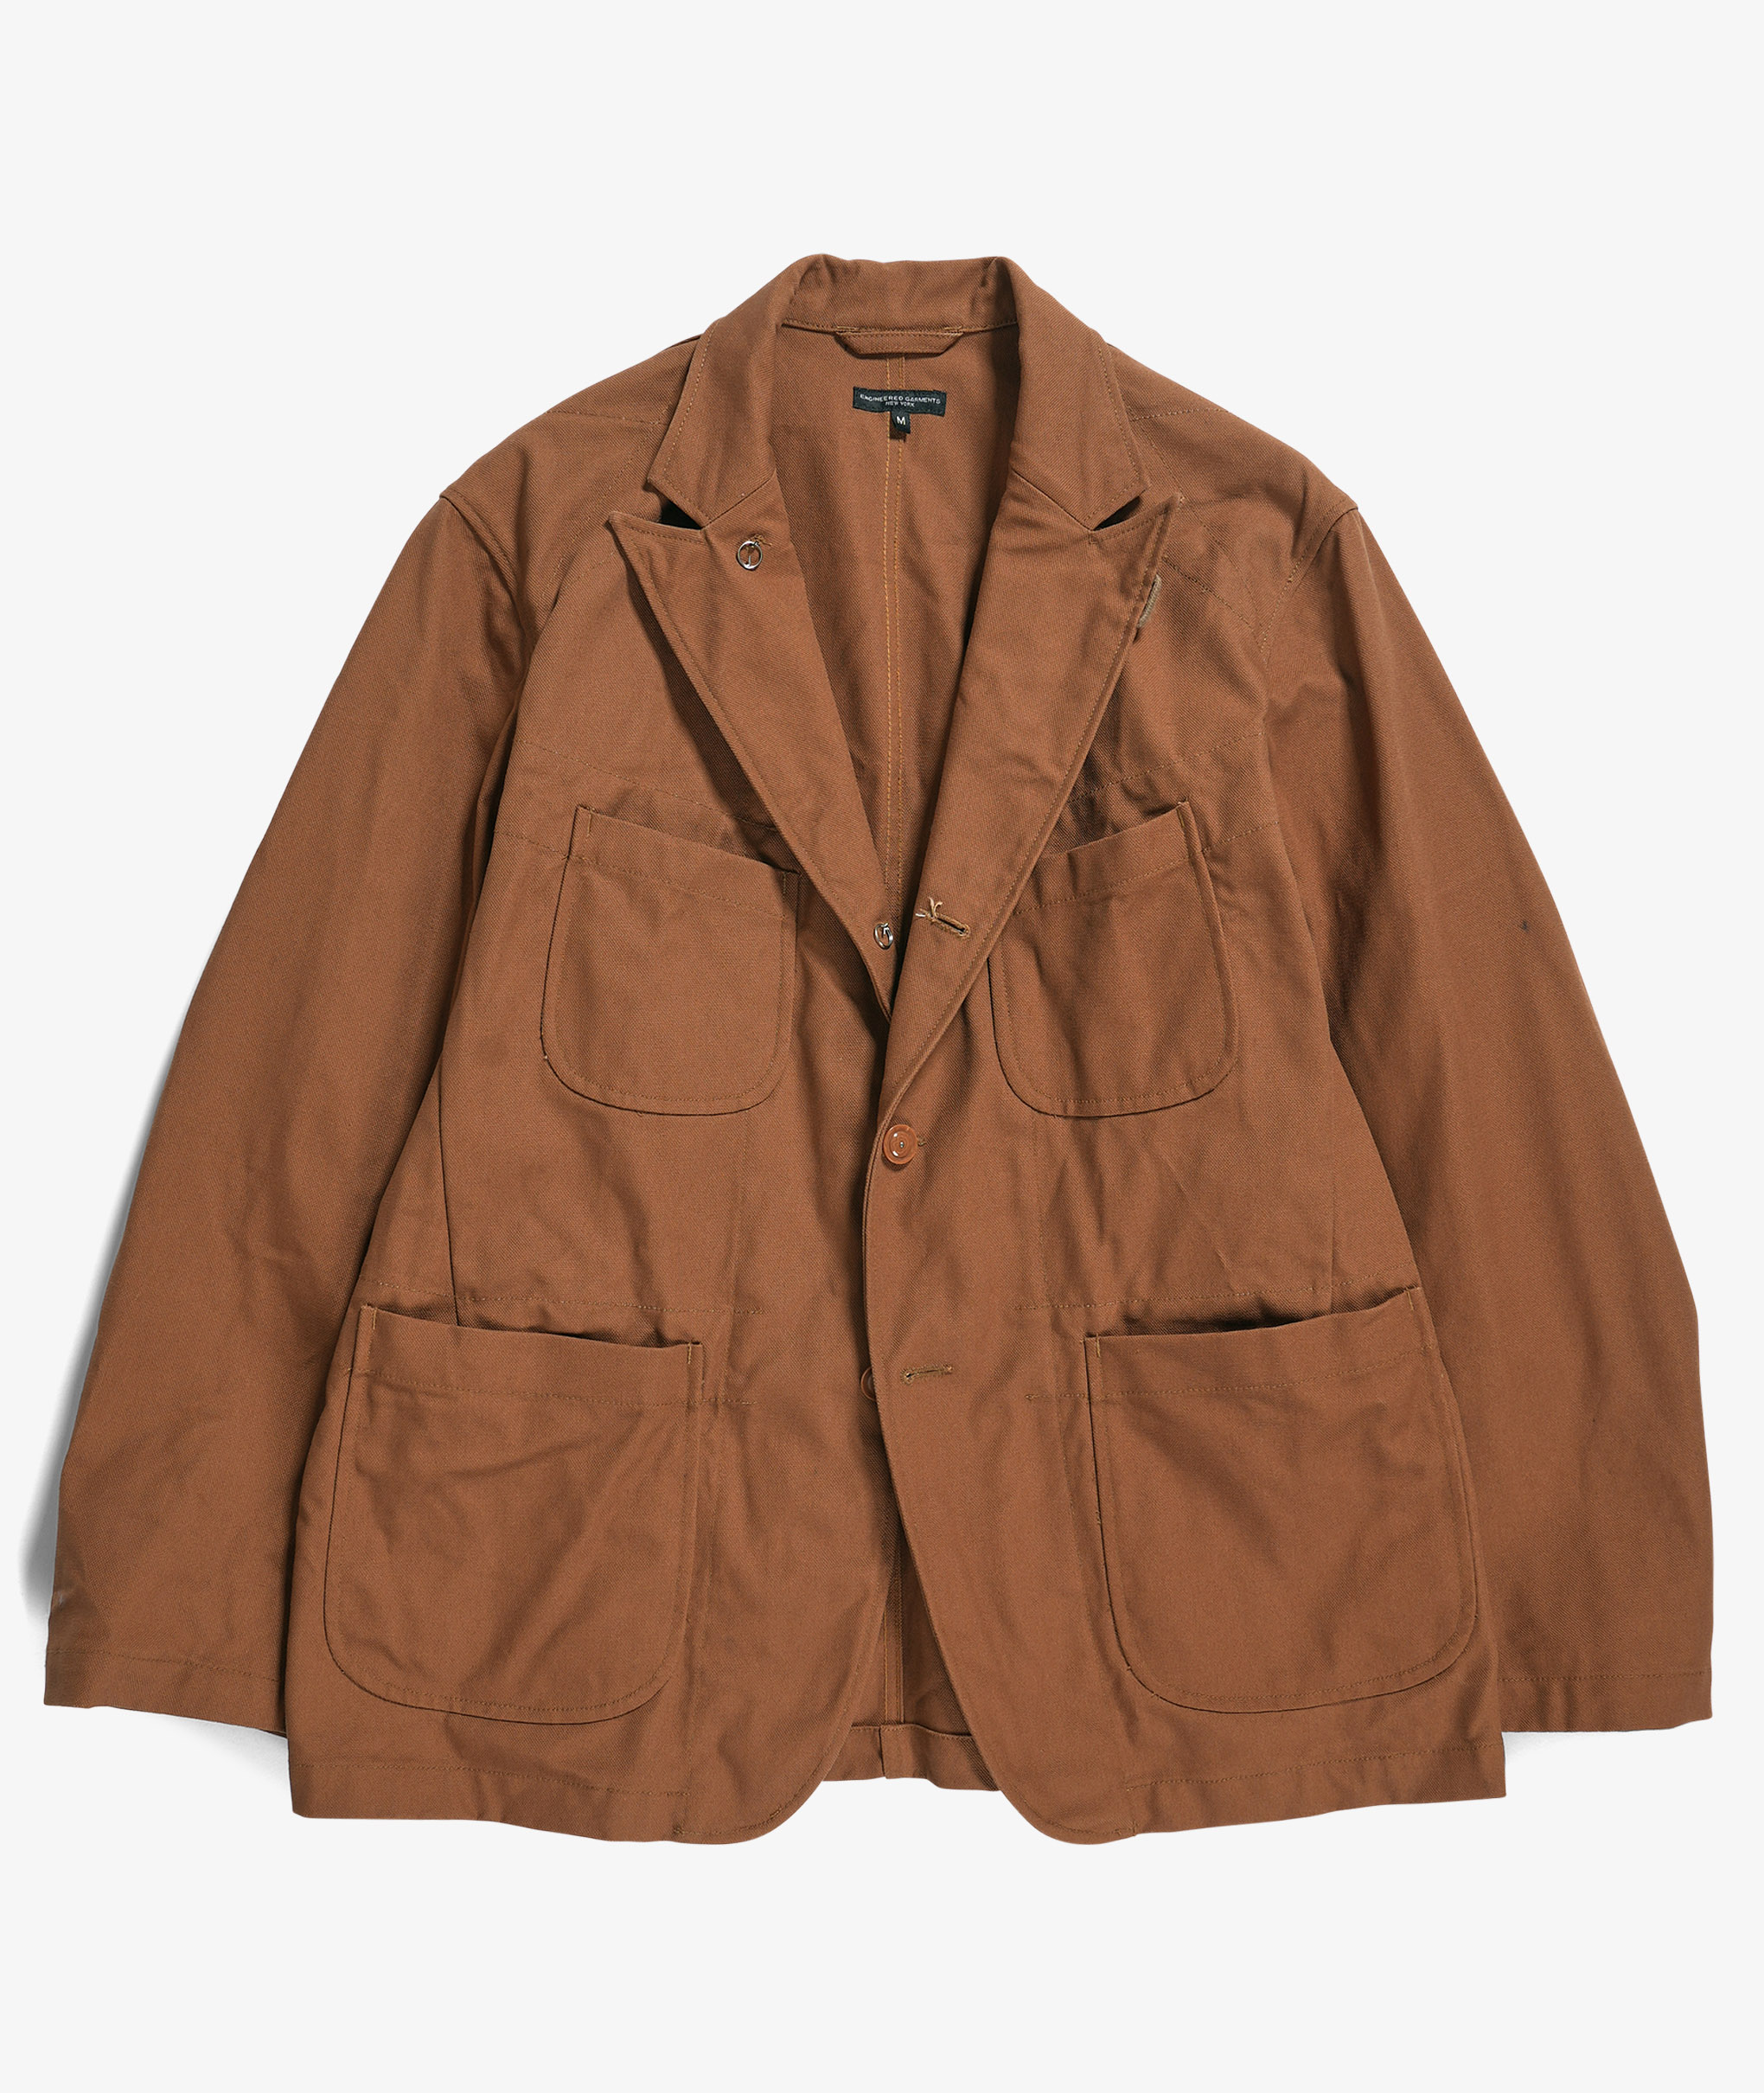 Norse Store | Shipping Worldwide - Engineered Garments Bedford